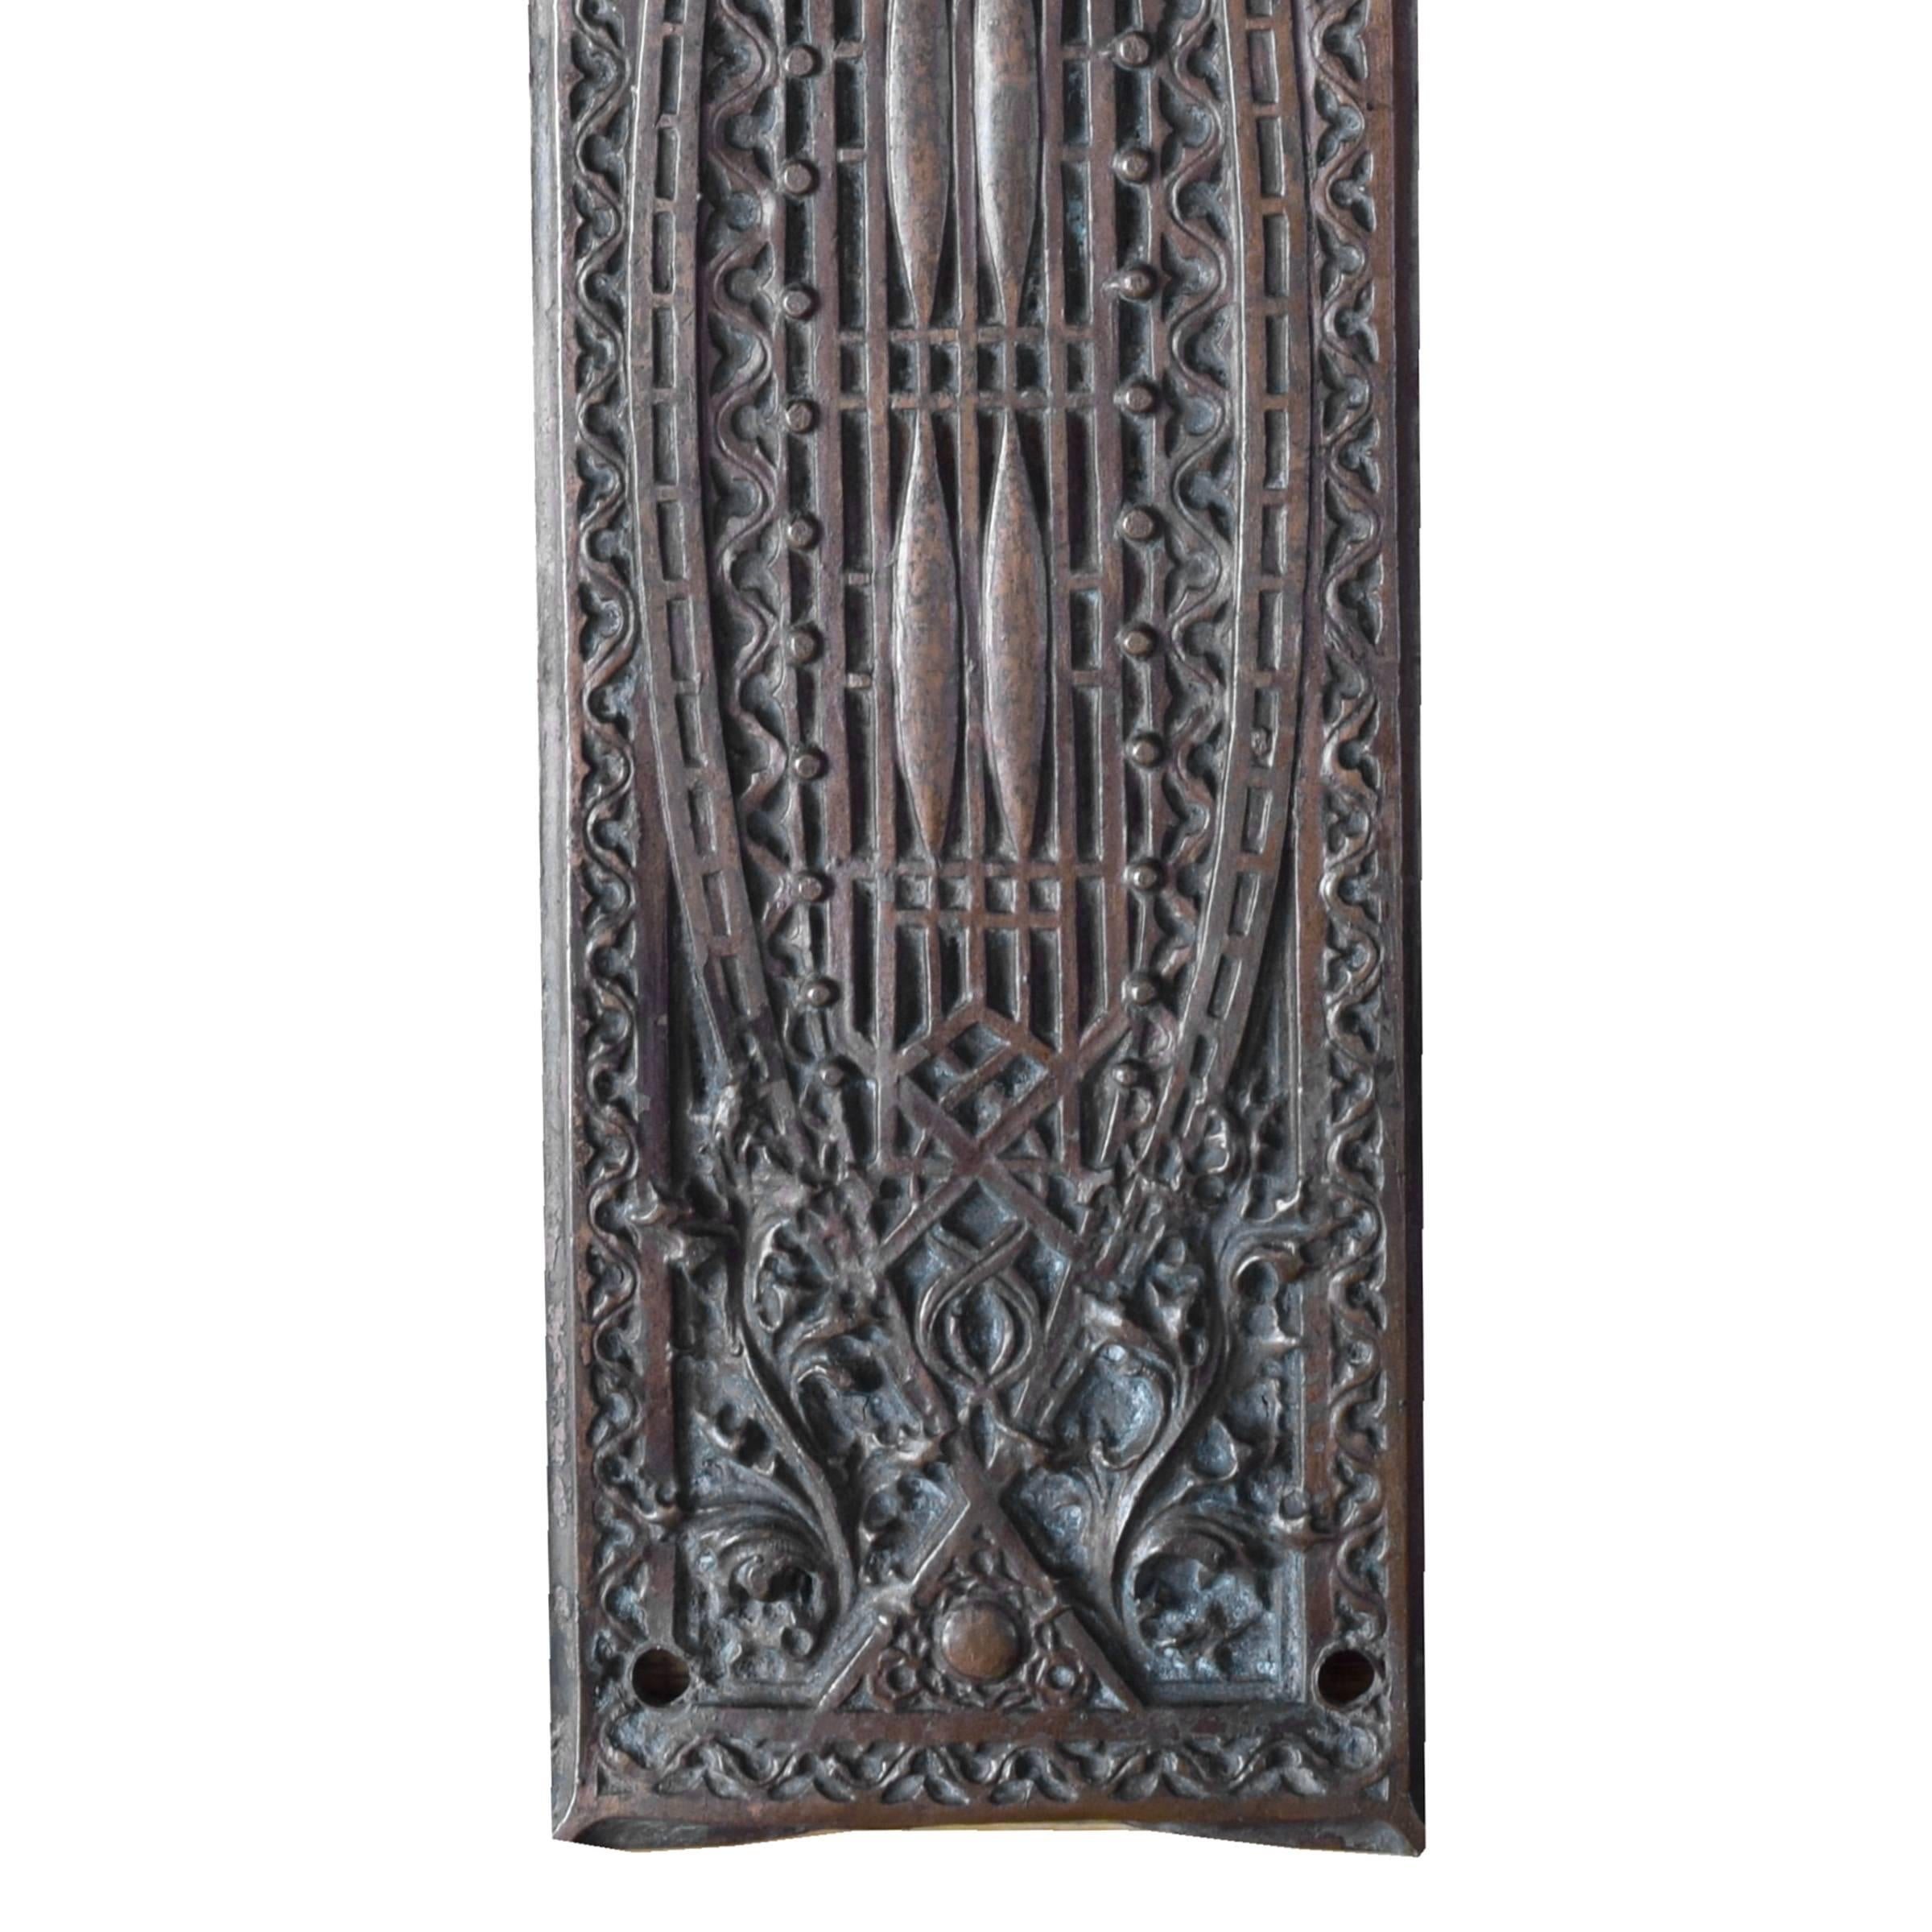 An extremely rare Louis Sullivan designed stamped copper first floor elevator enclosure grille T-plate from the Chicago Stock Exchange, 1893, designed by the legendary firm of Adler and Sullivan.